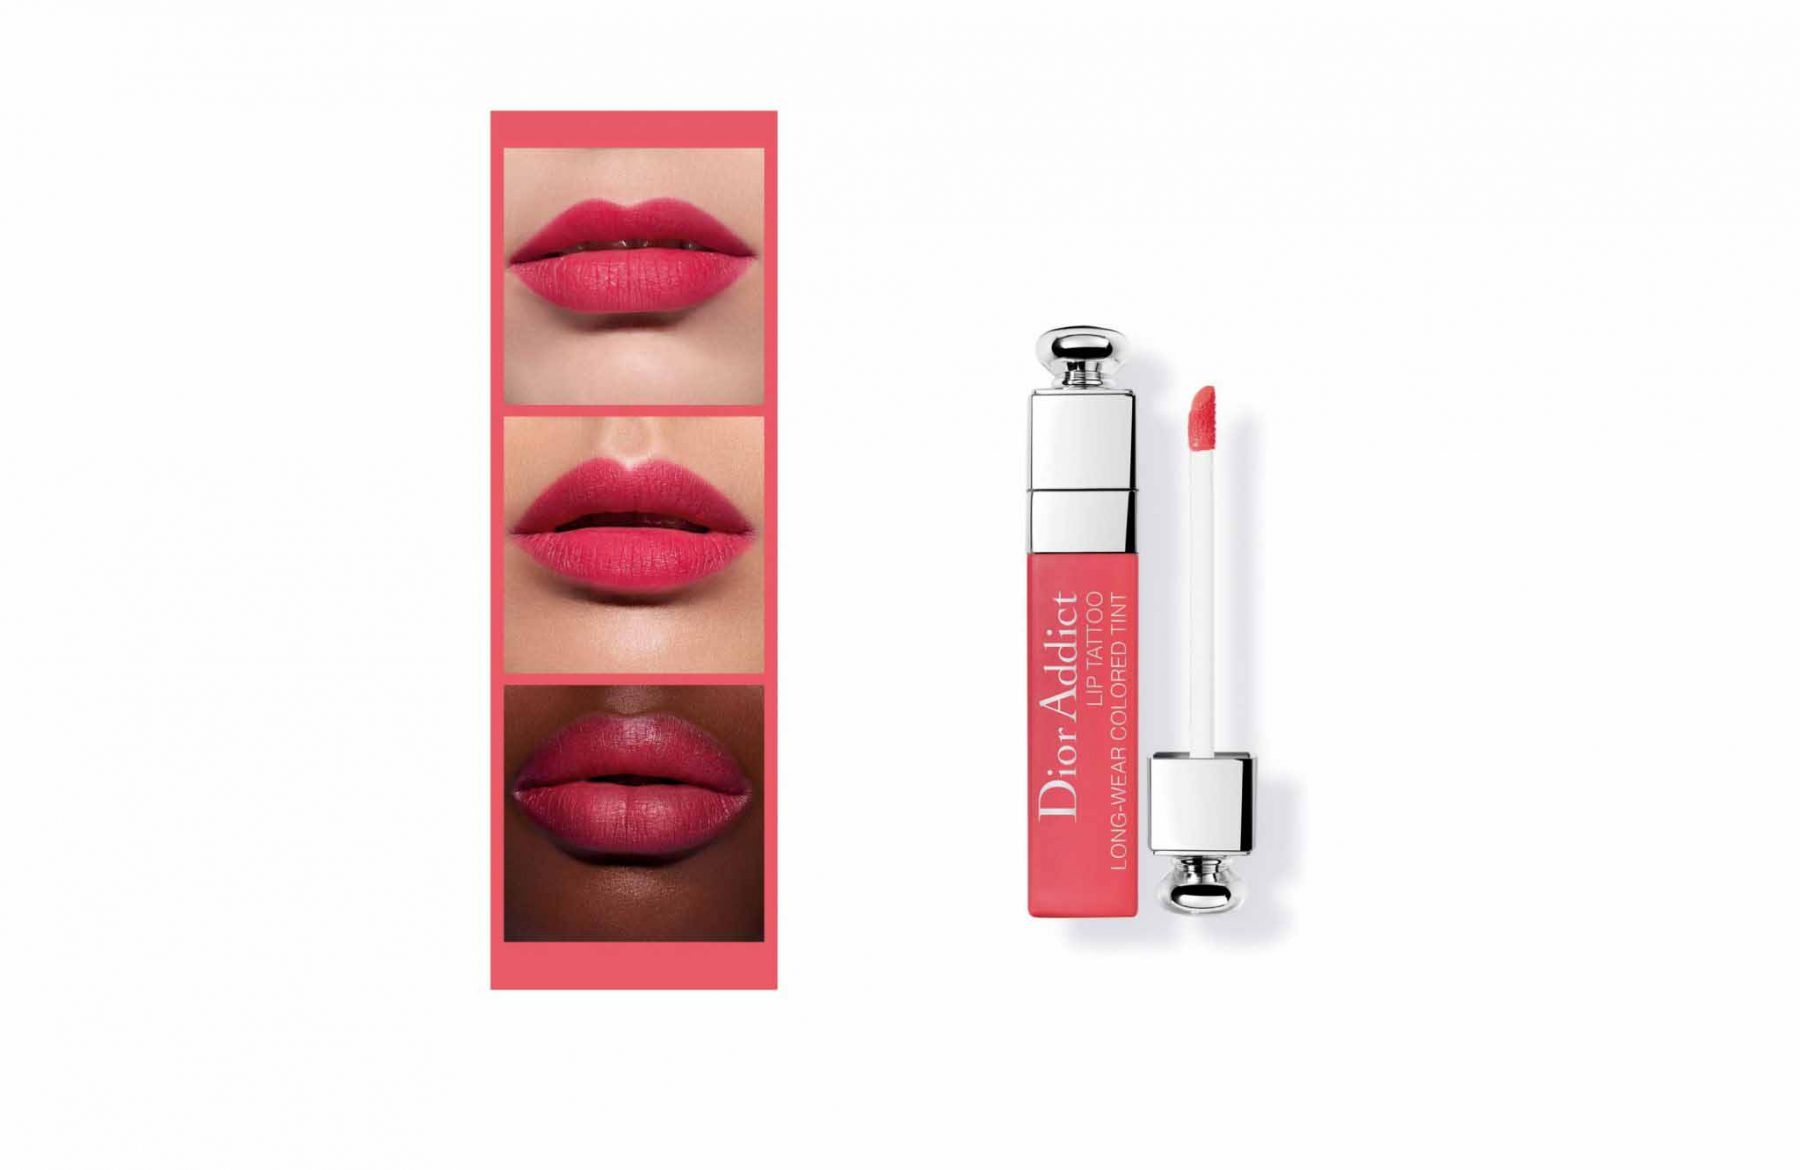 Diors new peach tea lippie is such a flattering shade of pink you dont  want to miss it  Beauty magazine for women in Malaysia  Beauty tips  discounts trends and more